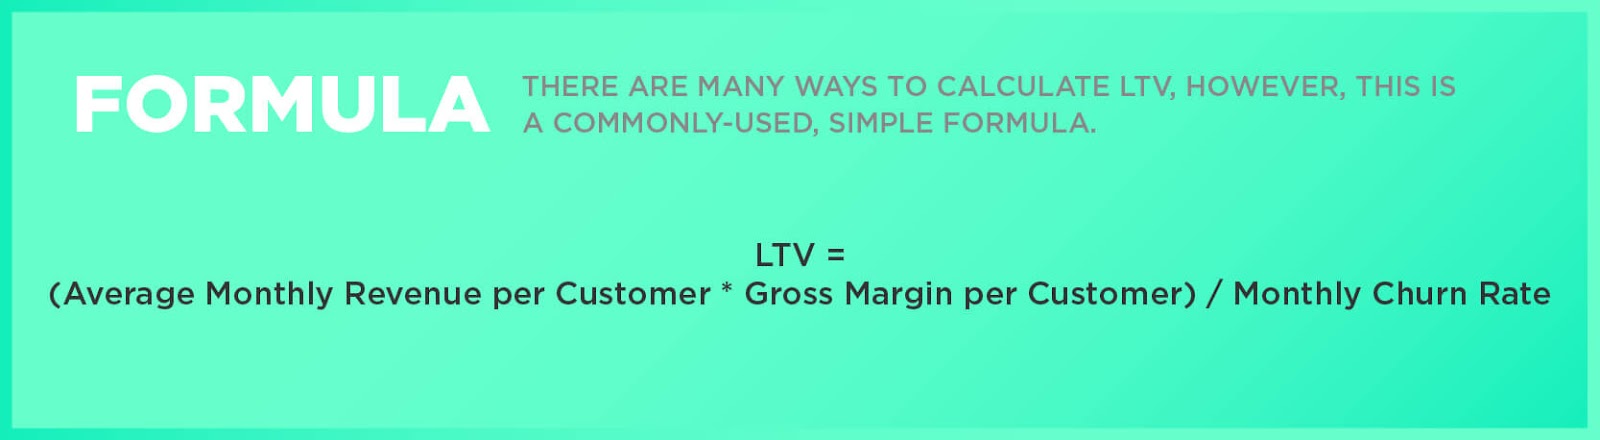 Formula: There are many ways to calculate LTV, however, this is a commonly-used, simple formula. LTV = (Average Monthly Revenue per Customer * Gross Margin per Customer) / Monthly Churn Rate